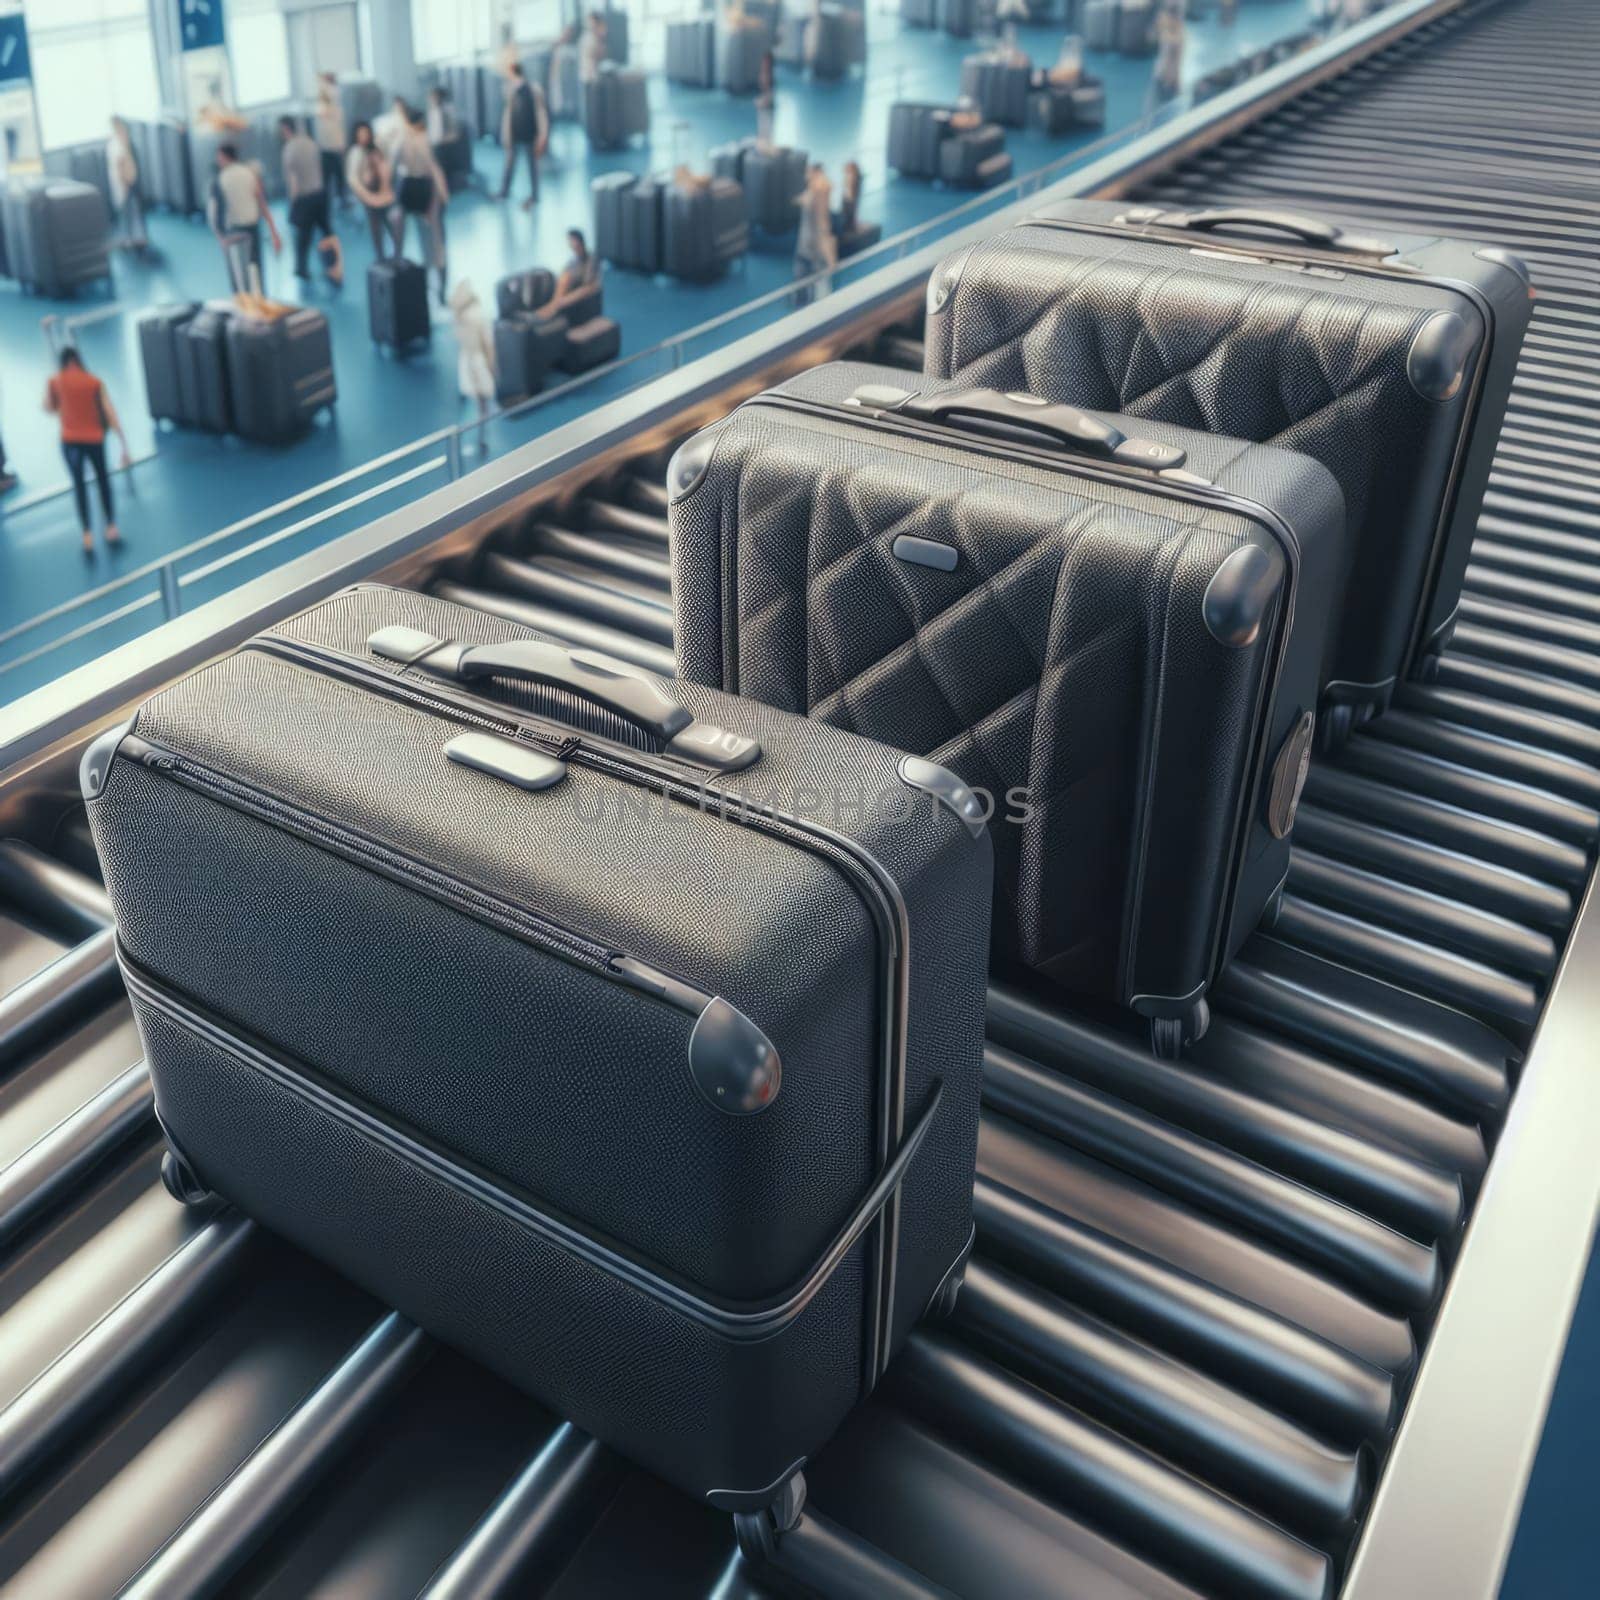 Three black suitcases on a conveyor belt in an airport terminal with a people on blurred background. by sfinks